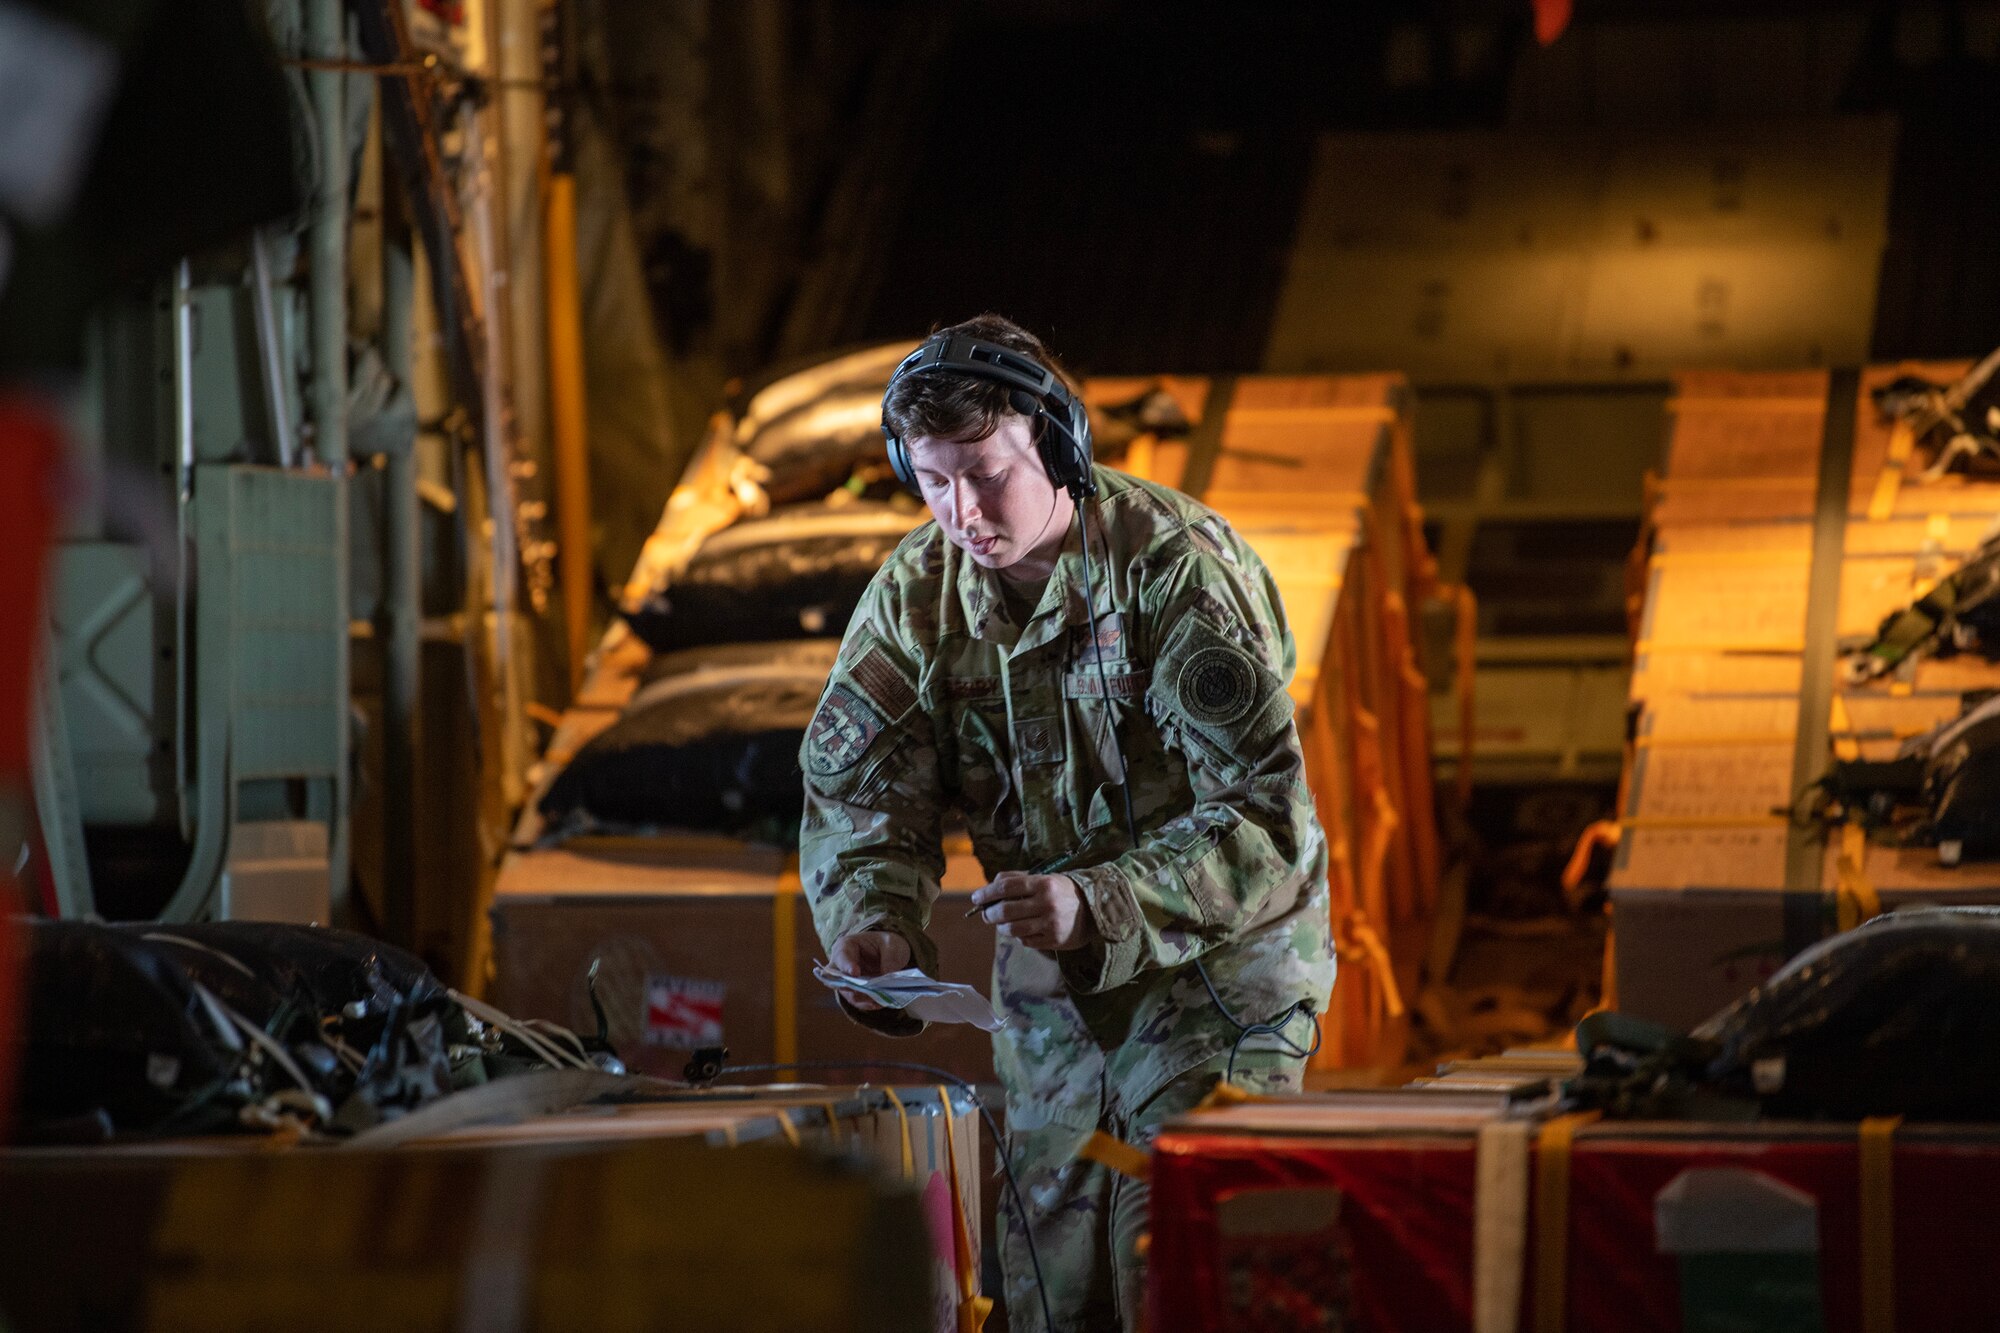 loadmaster checks bundles in the cargo area of a C-130J